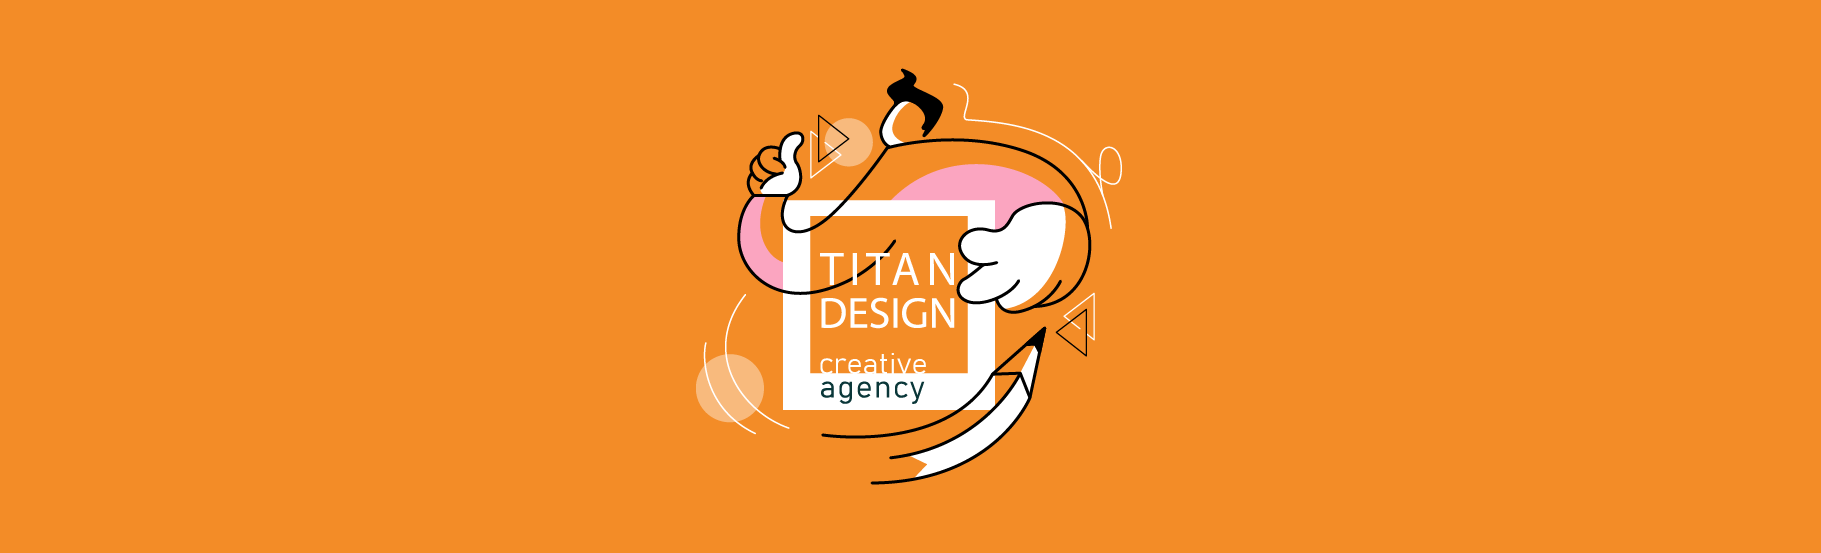 Titan Design team has the best solutions for your content plan